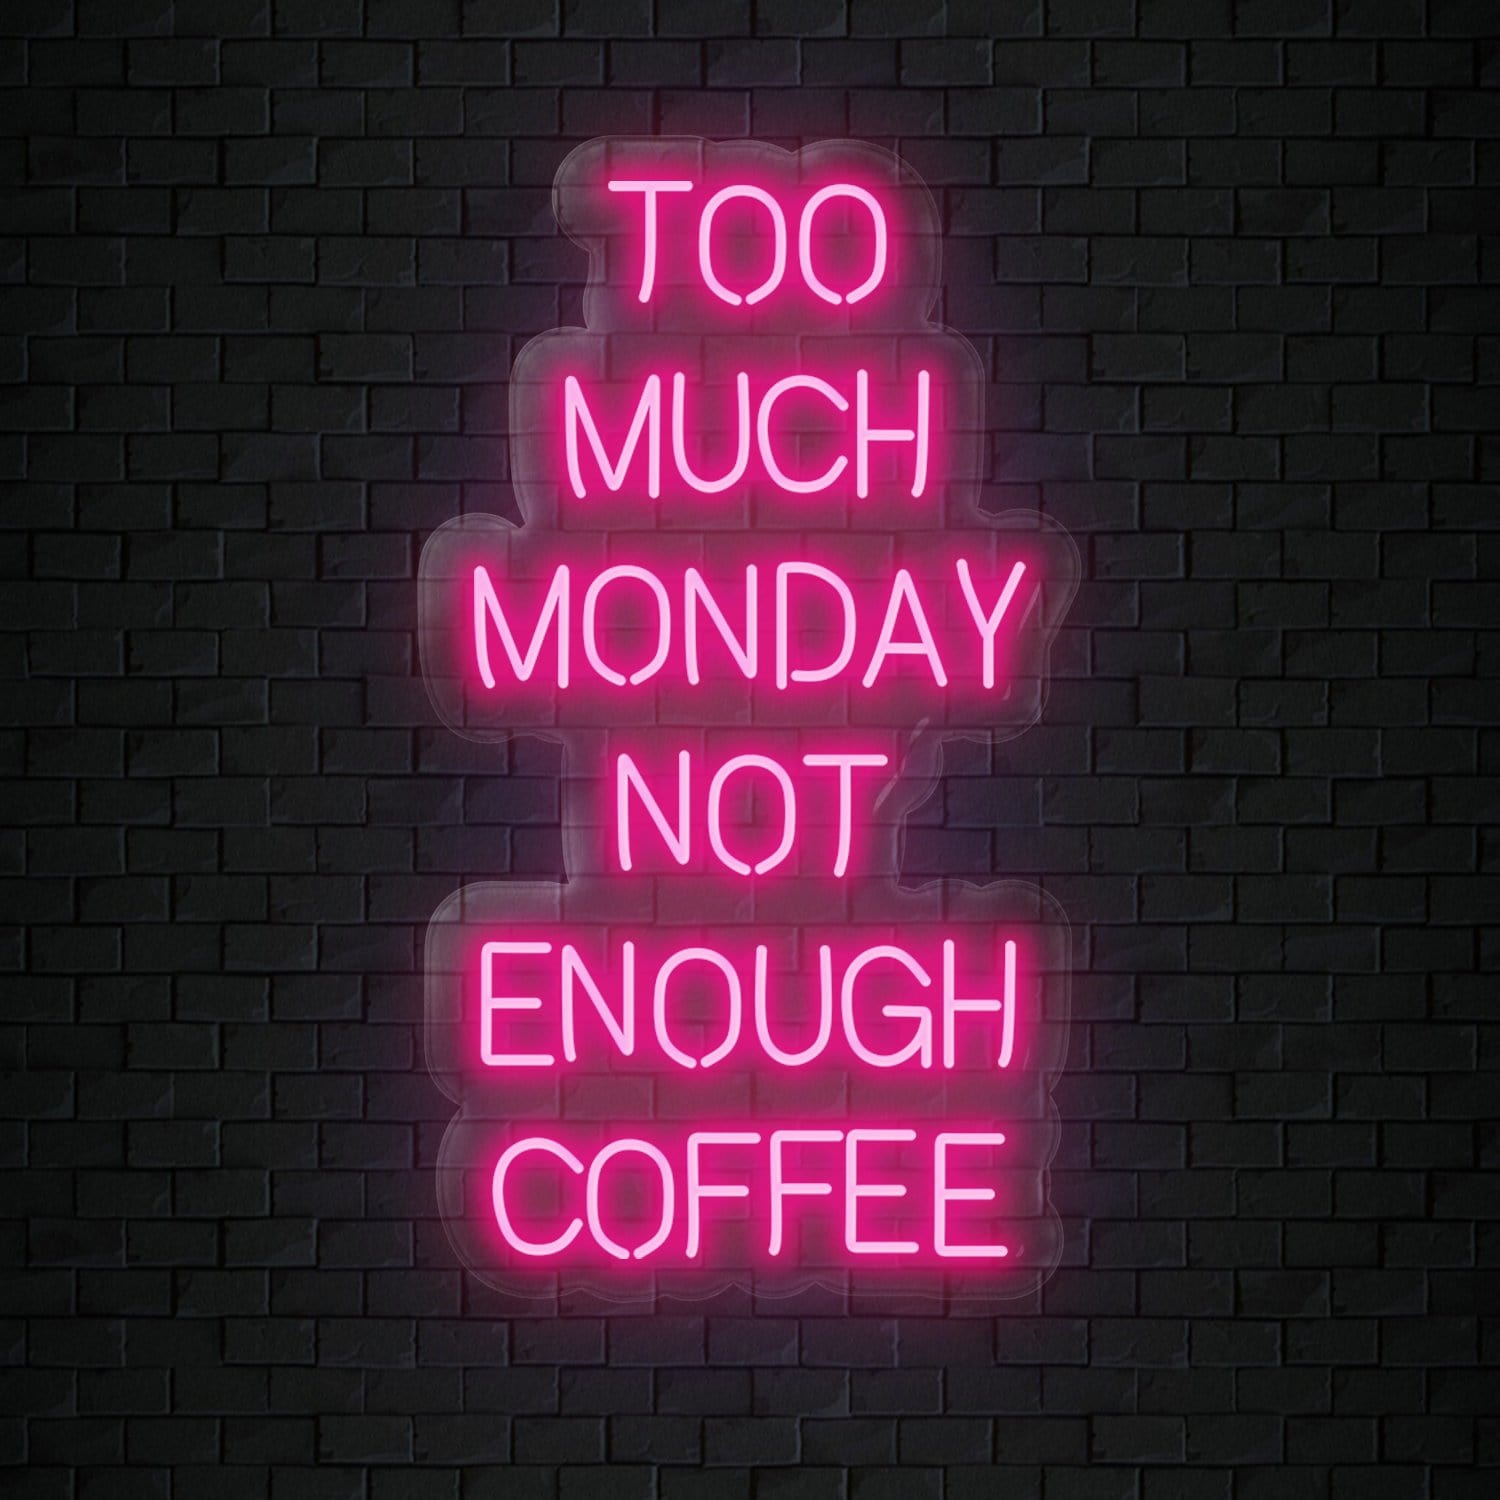 "Too Much Monday Not Enough Coffee" LED  Neon Sign Schriftzug - NEONEVERGLOW